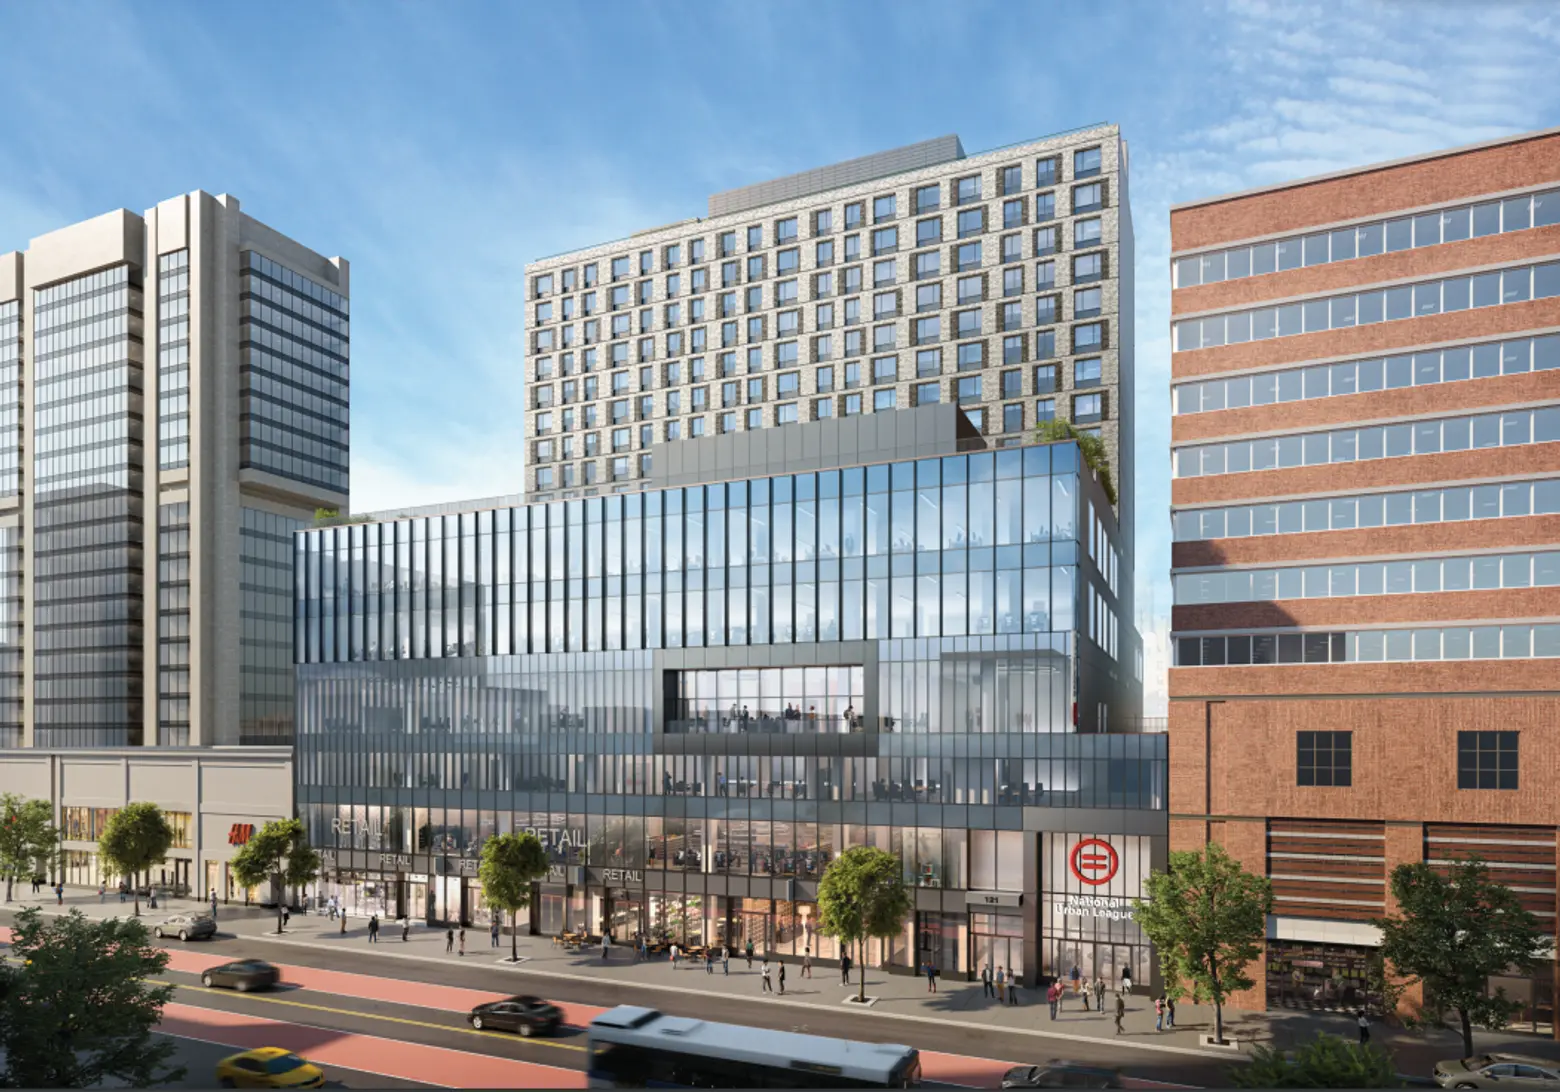 Target to open at major mixed-use development in Harlem